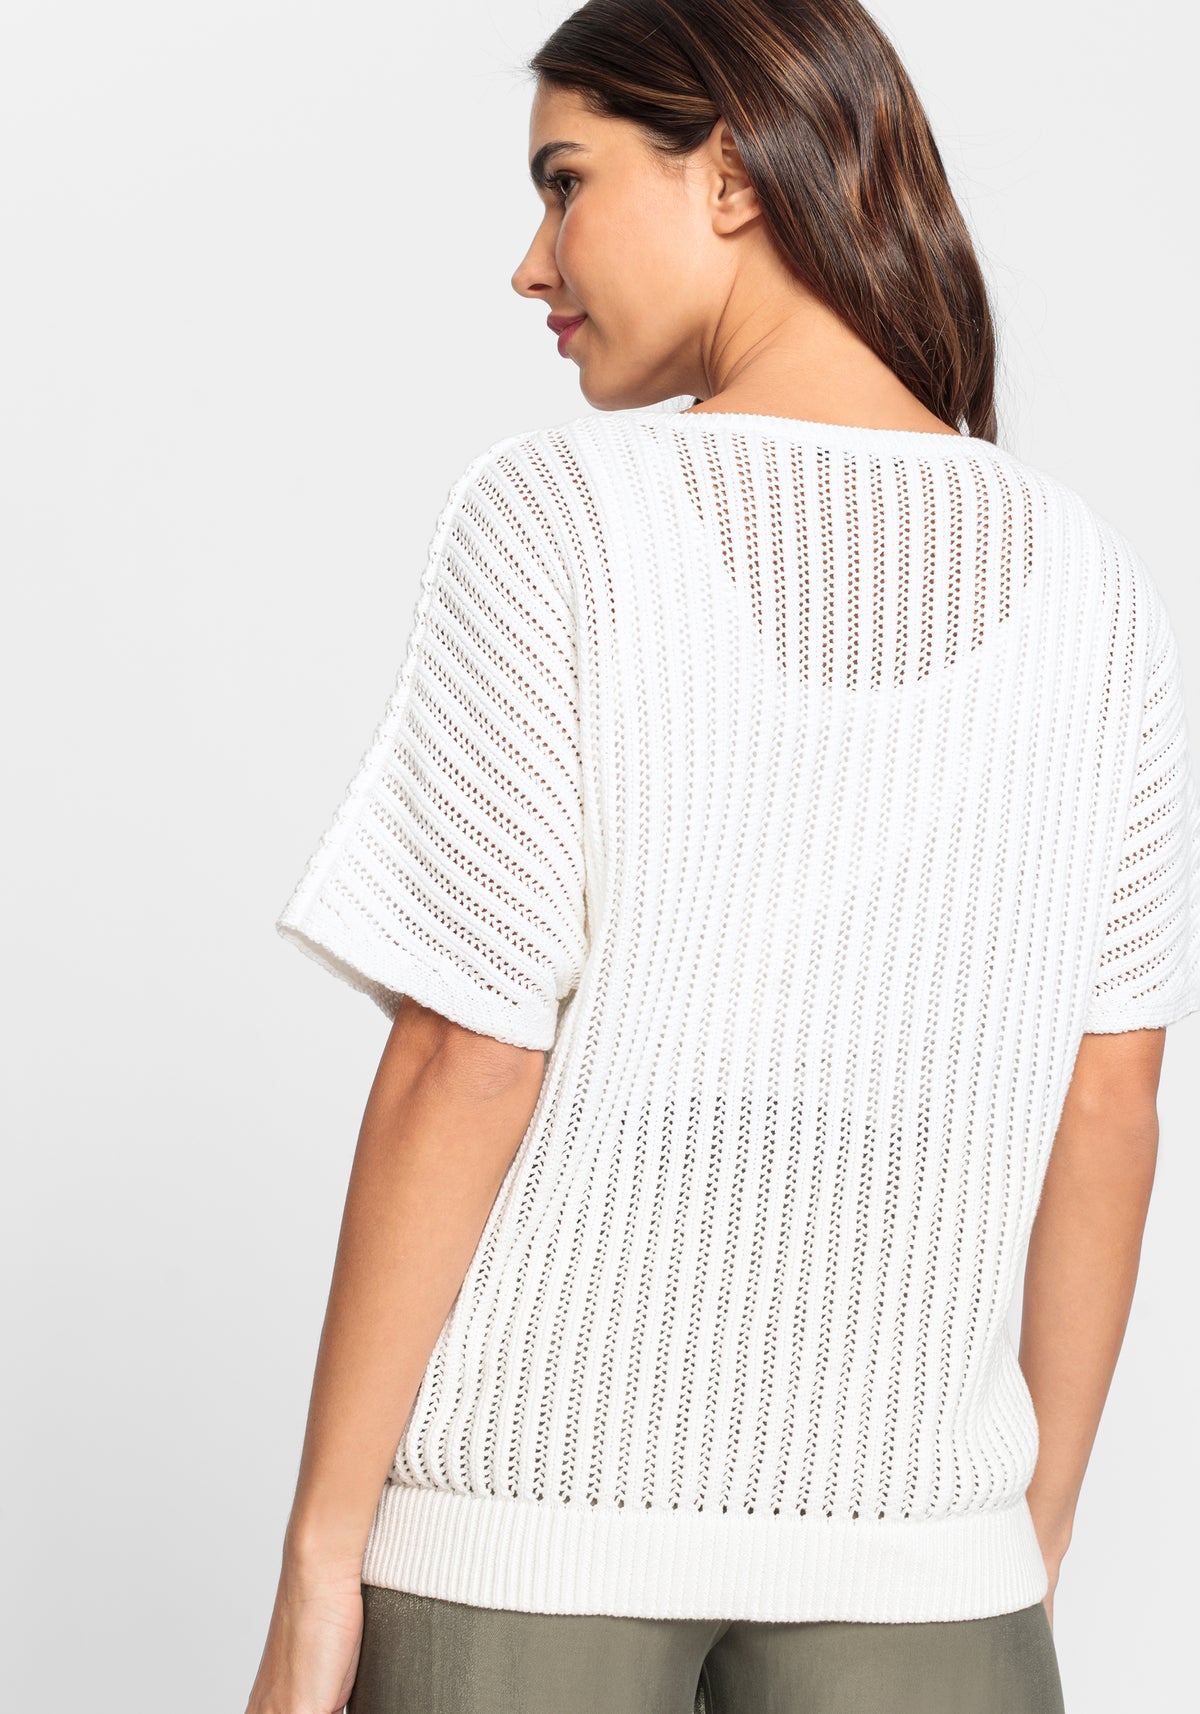 100% Cotton Short Sleeve Broderie Anglaise Top